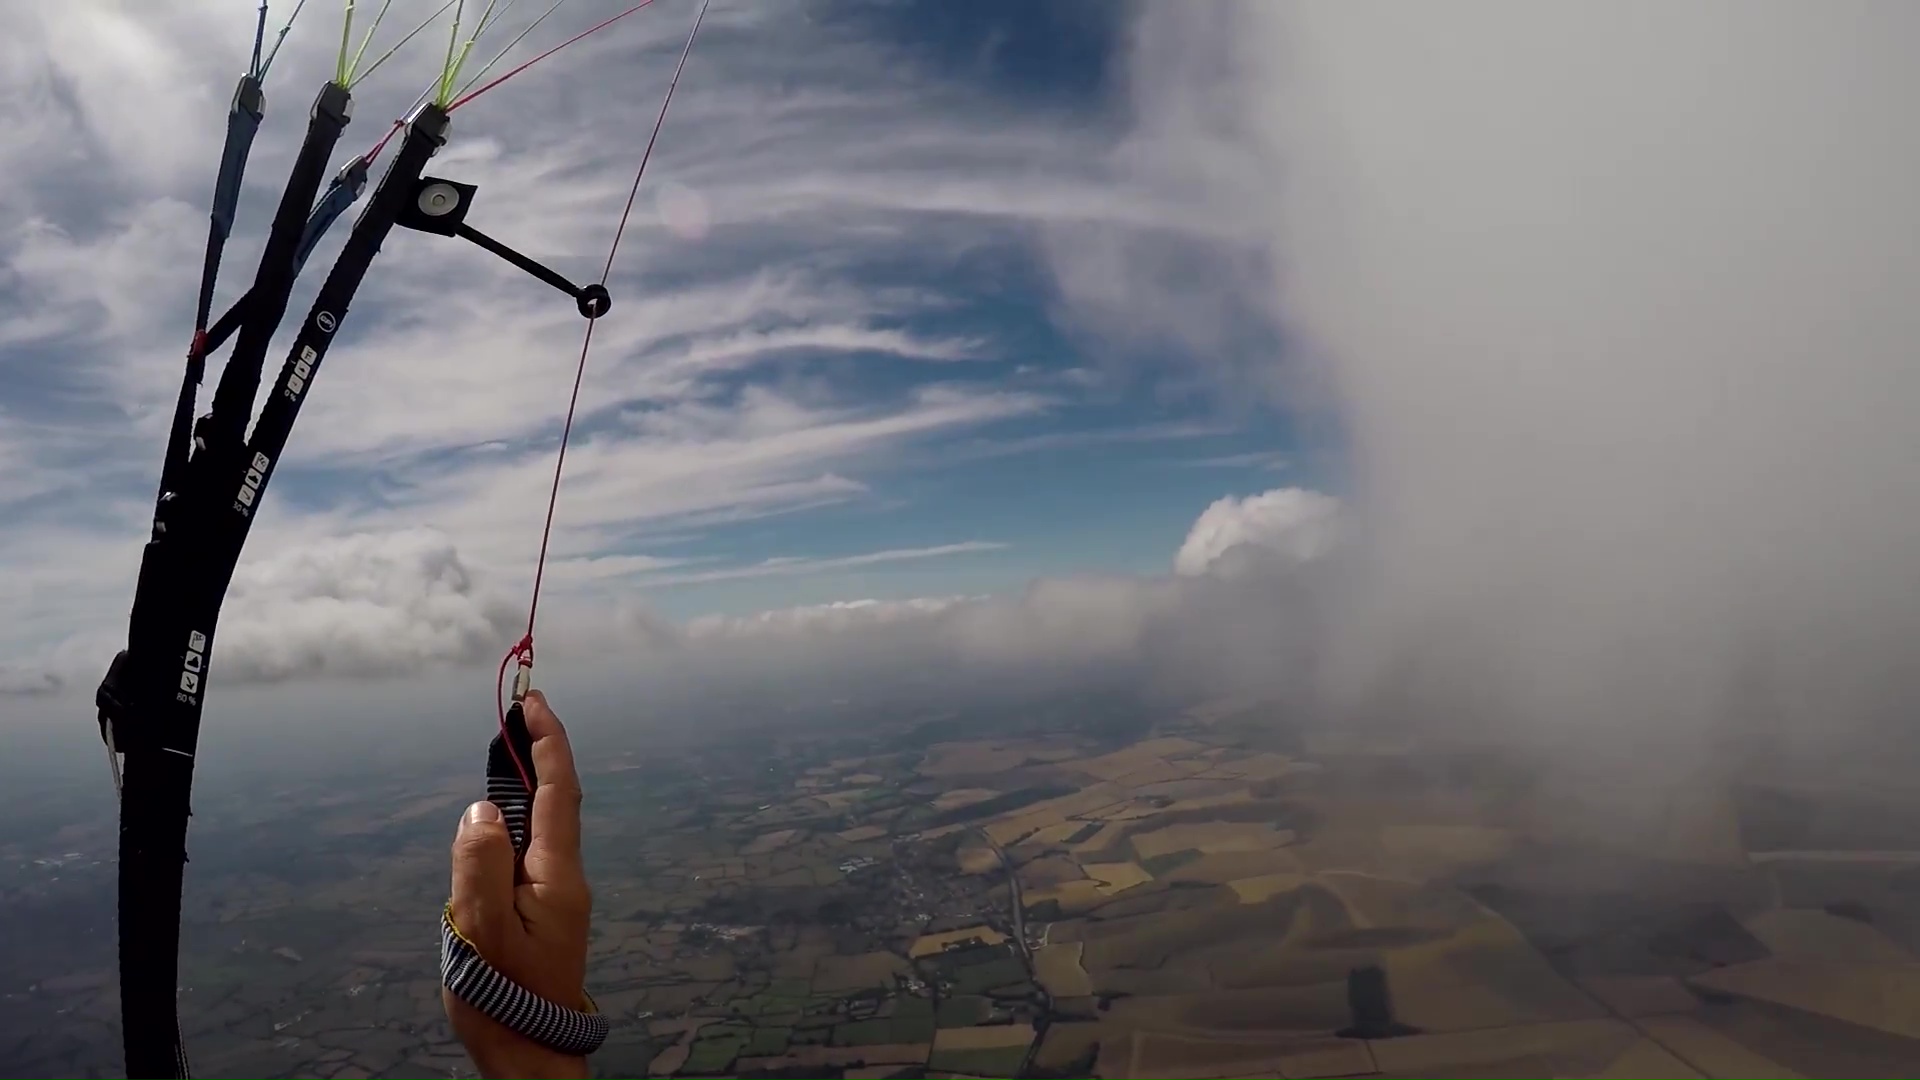 Tandem paragliding experiences and days out with Mile High Paragliding in Sussex